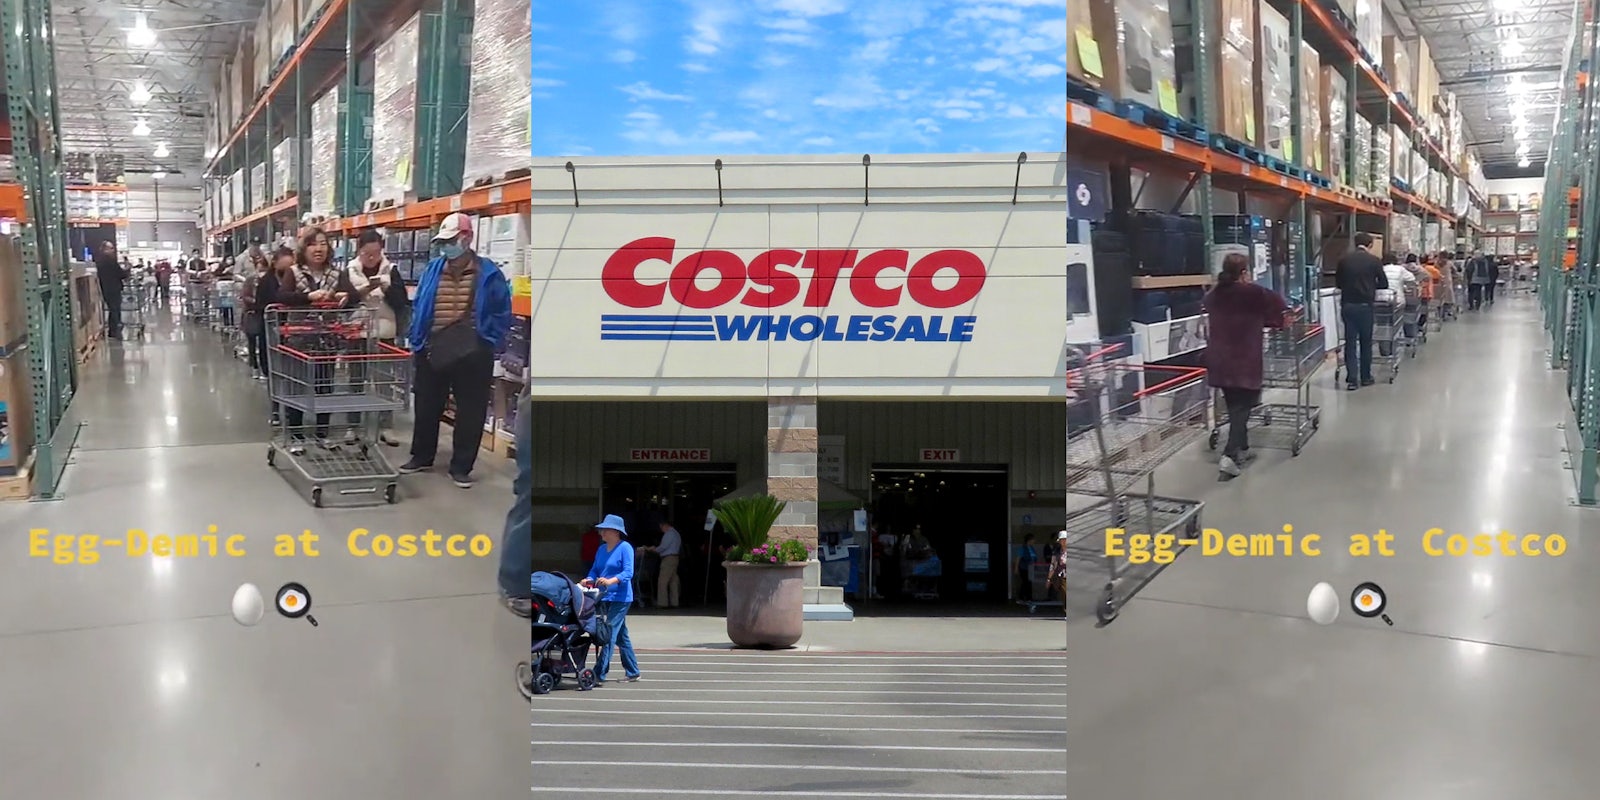 Costco line of shoppers waiting for eggs with caption 'Egg-Demic at Costco' (l) Costco building with sign and blue sky (c) Costco line of shoppers waiting for eggs with caption 'Egg-Demic at Costco' (r)